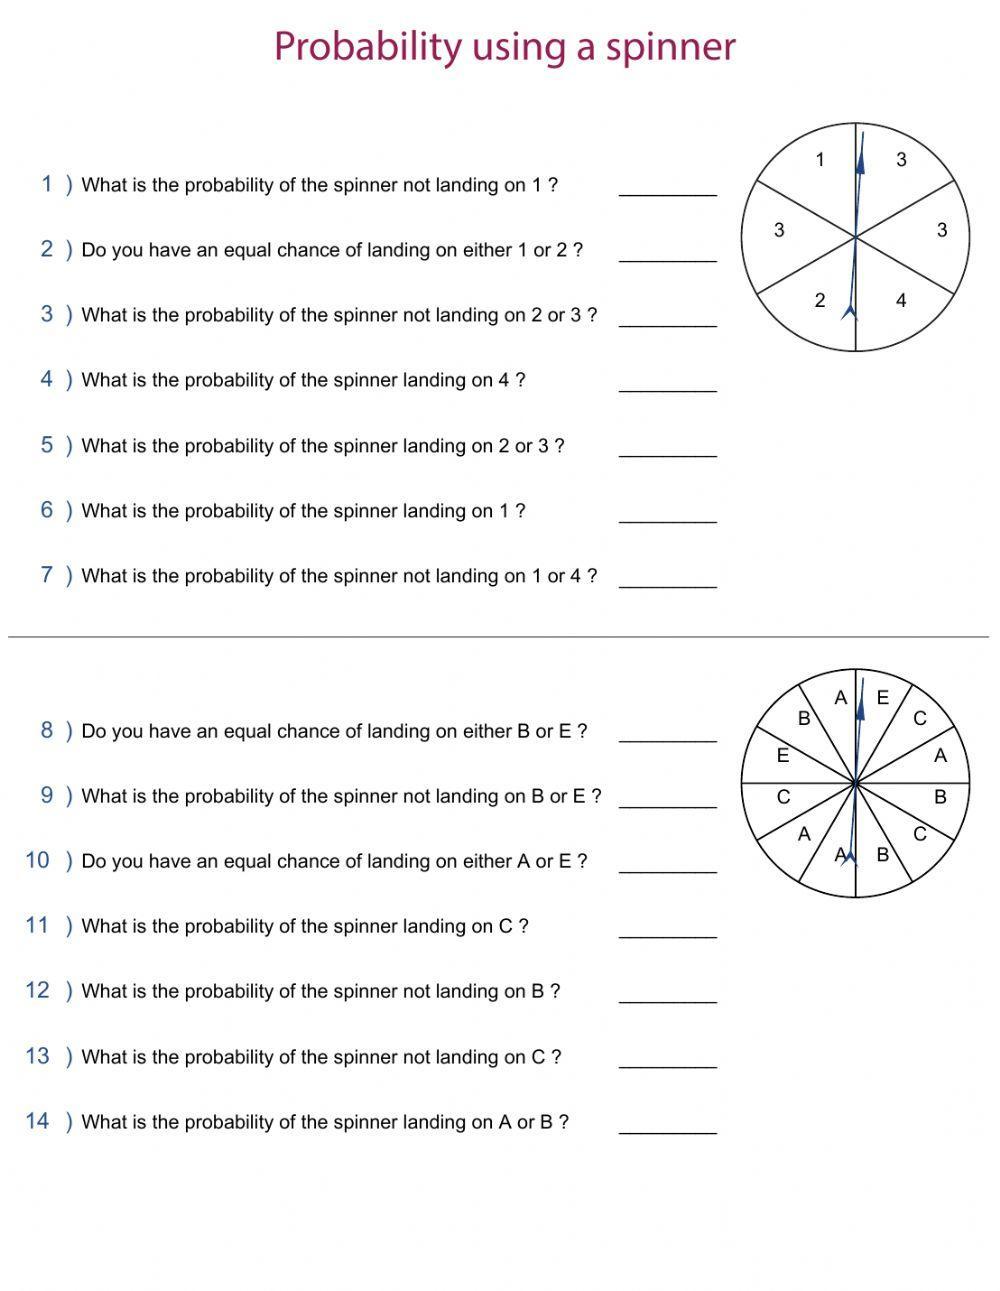 Probability with spinner